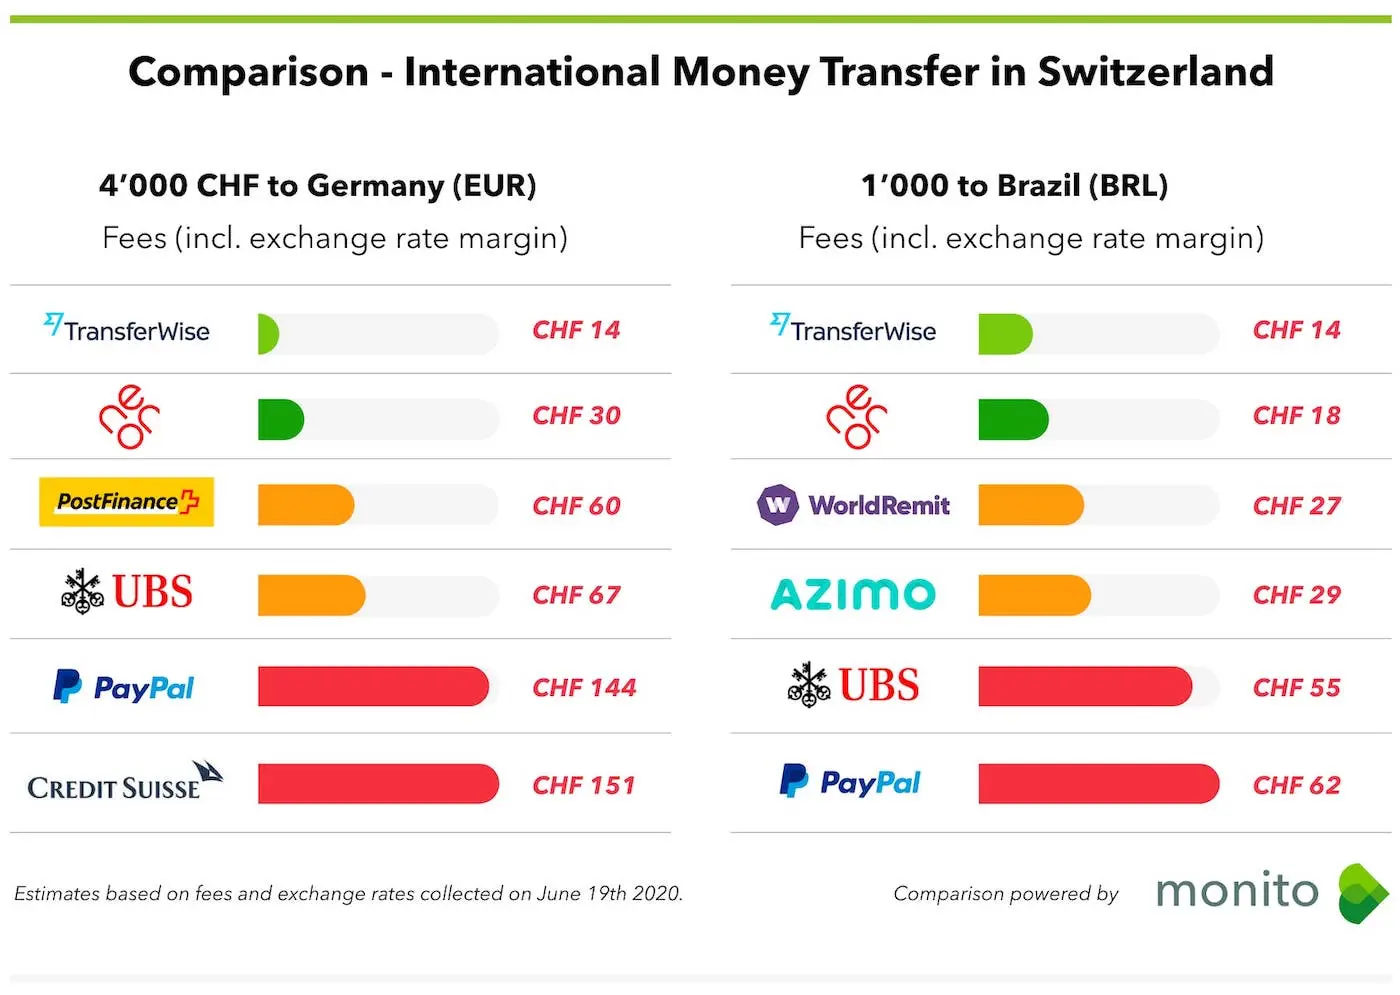 Comparison of neon bank and its alternatives for international money transfer in Switzerland (to send money abroad)